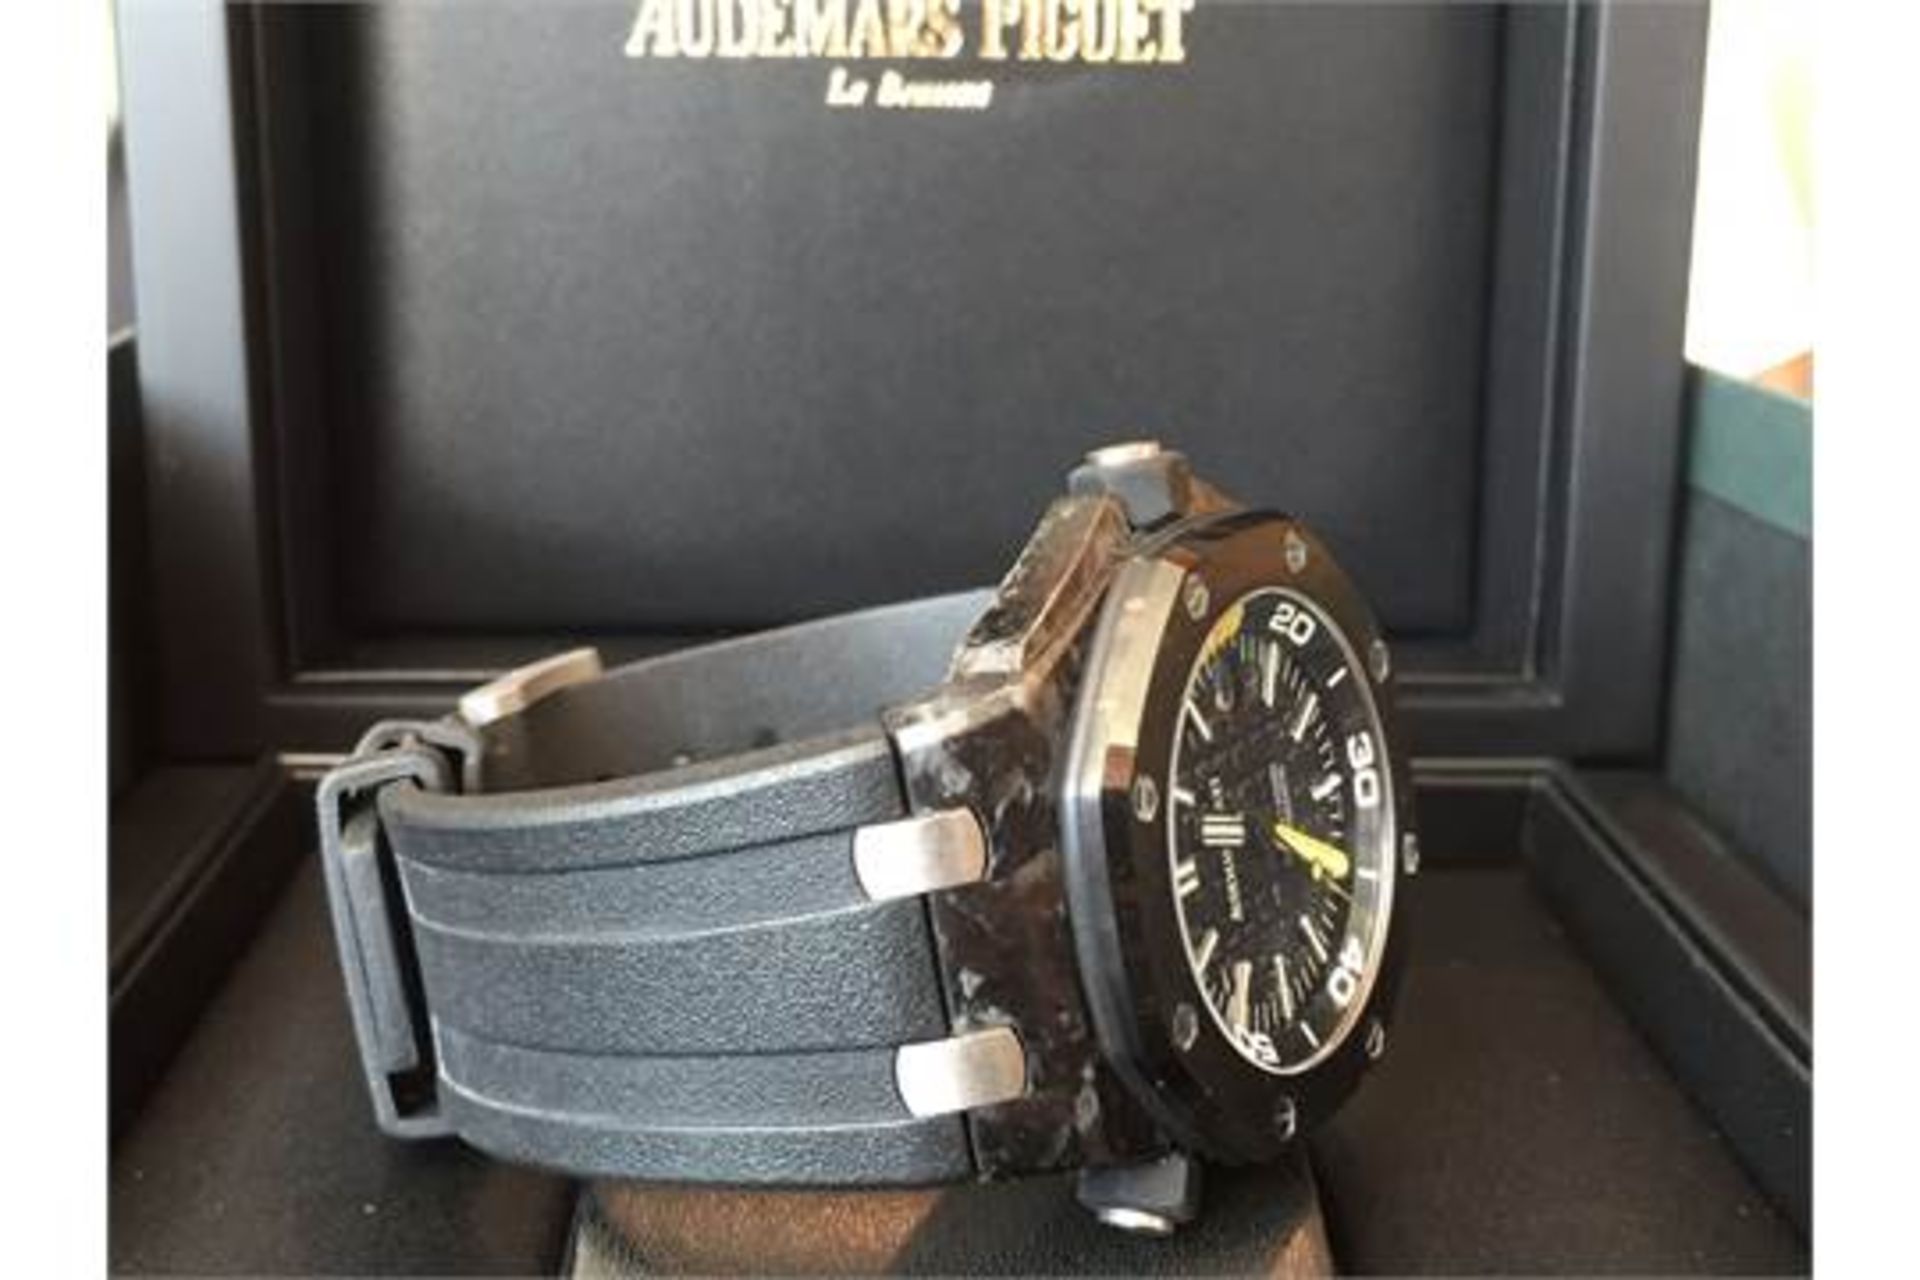 RRP PRROX £19,000 2014 AUDEMARS PIGUET ROYAL OAK OFF SHORE 44ml CERAMIC MODEL WITH BOX & PAPERS ON - Image 4 of 9